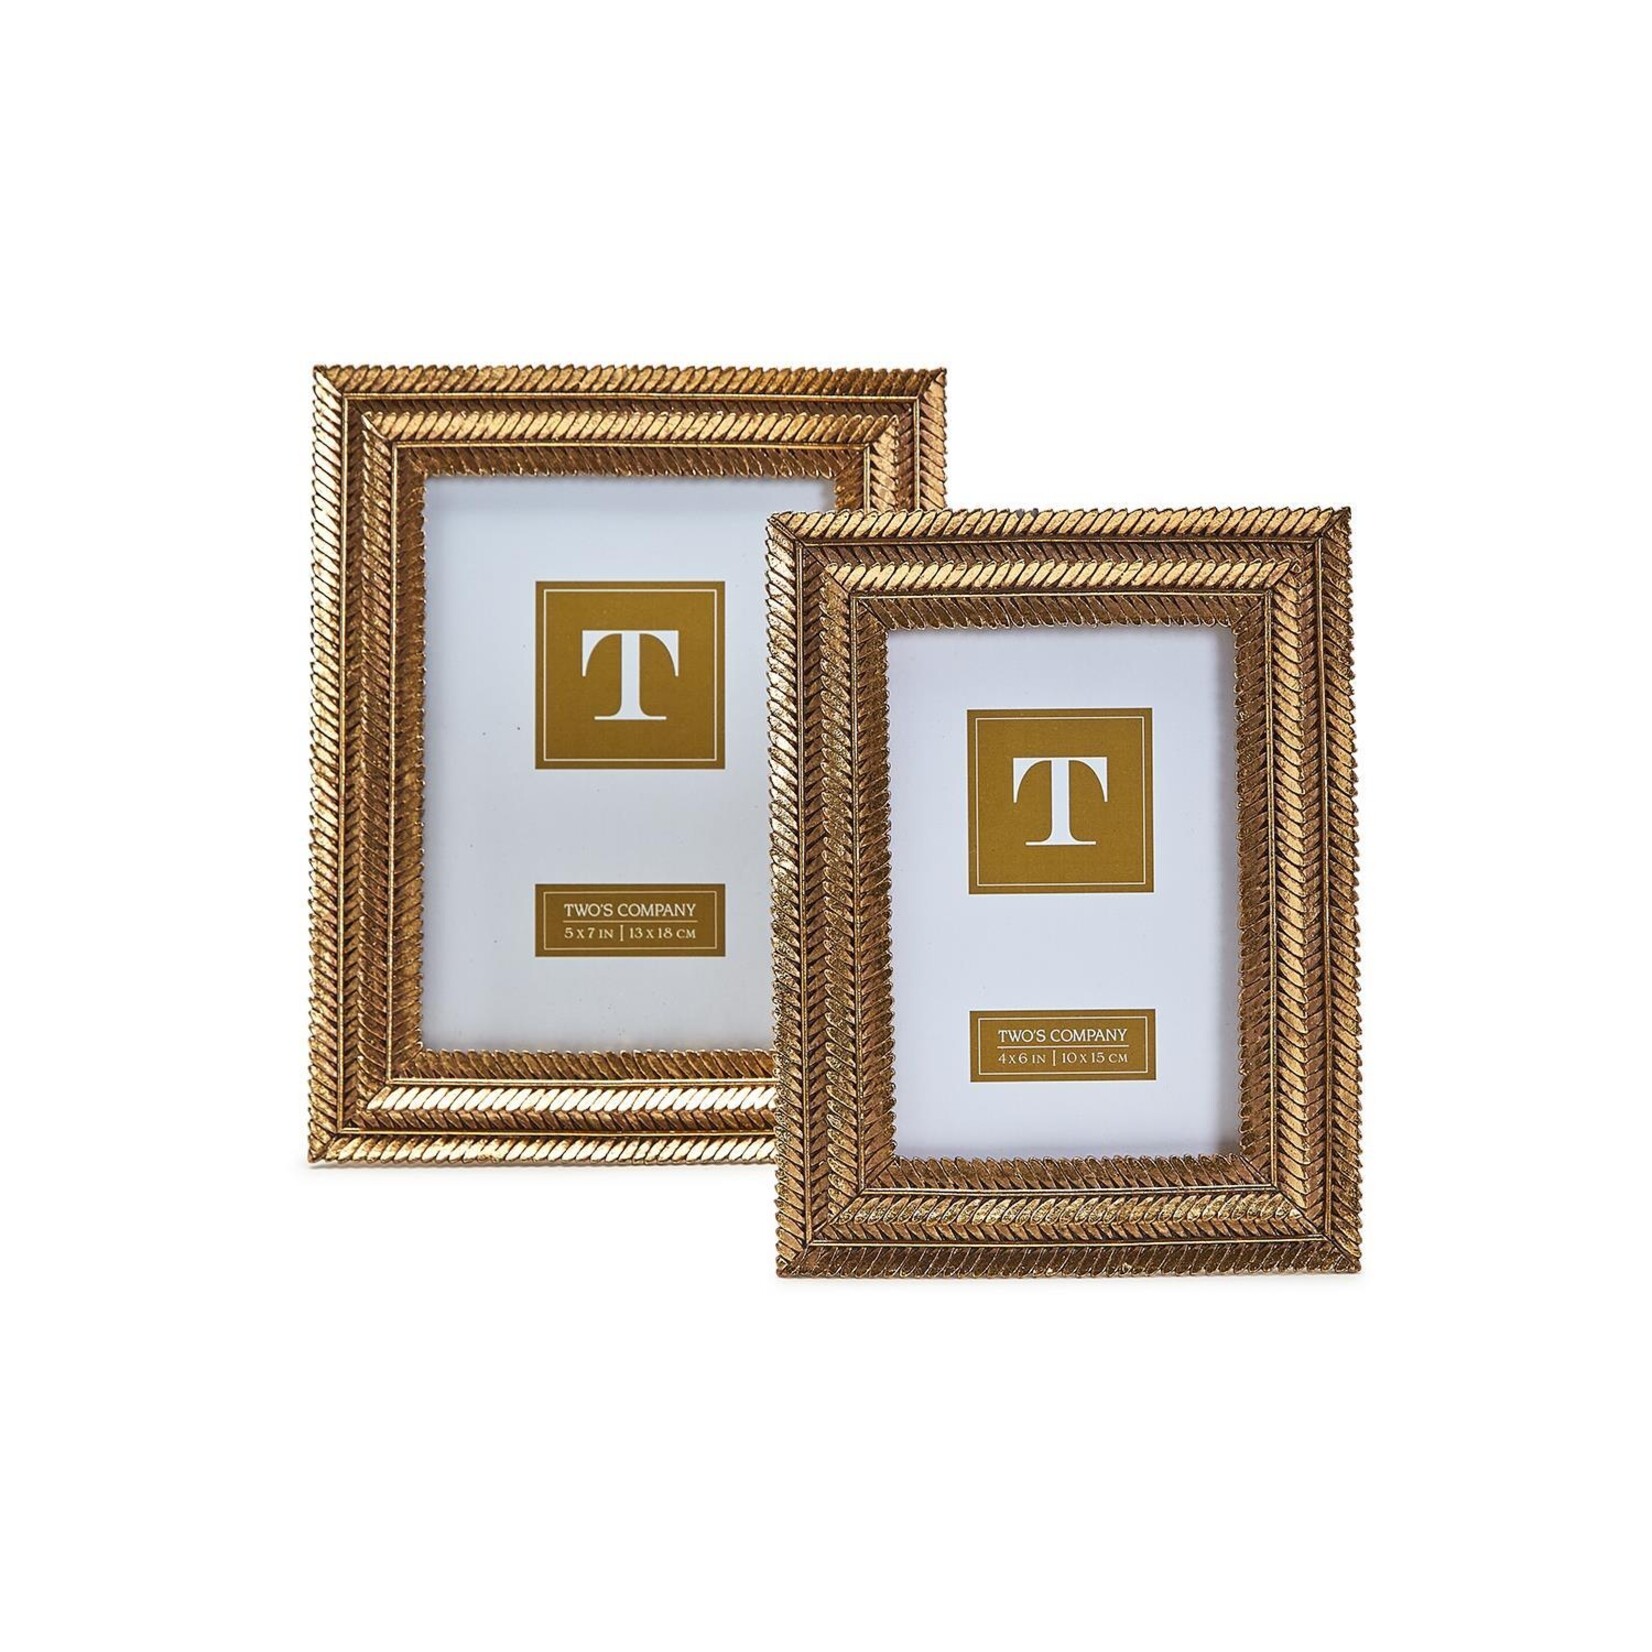 Two's Company Gold Fern Photo Frame 5x7